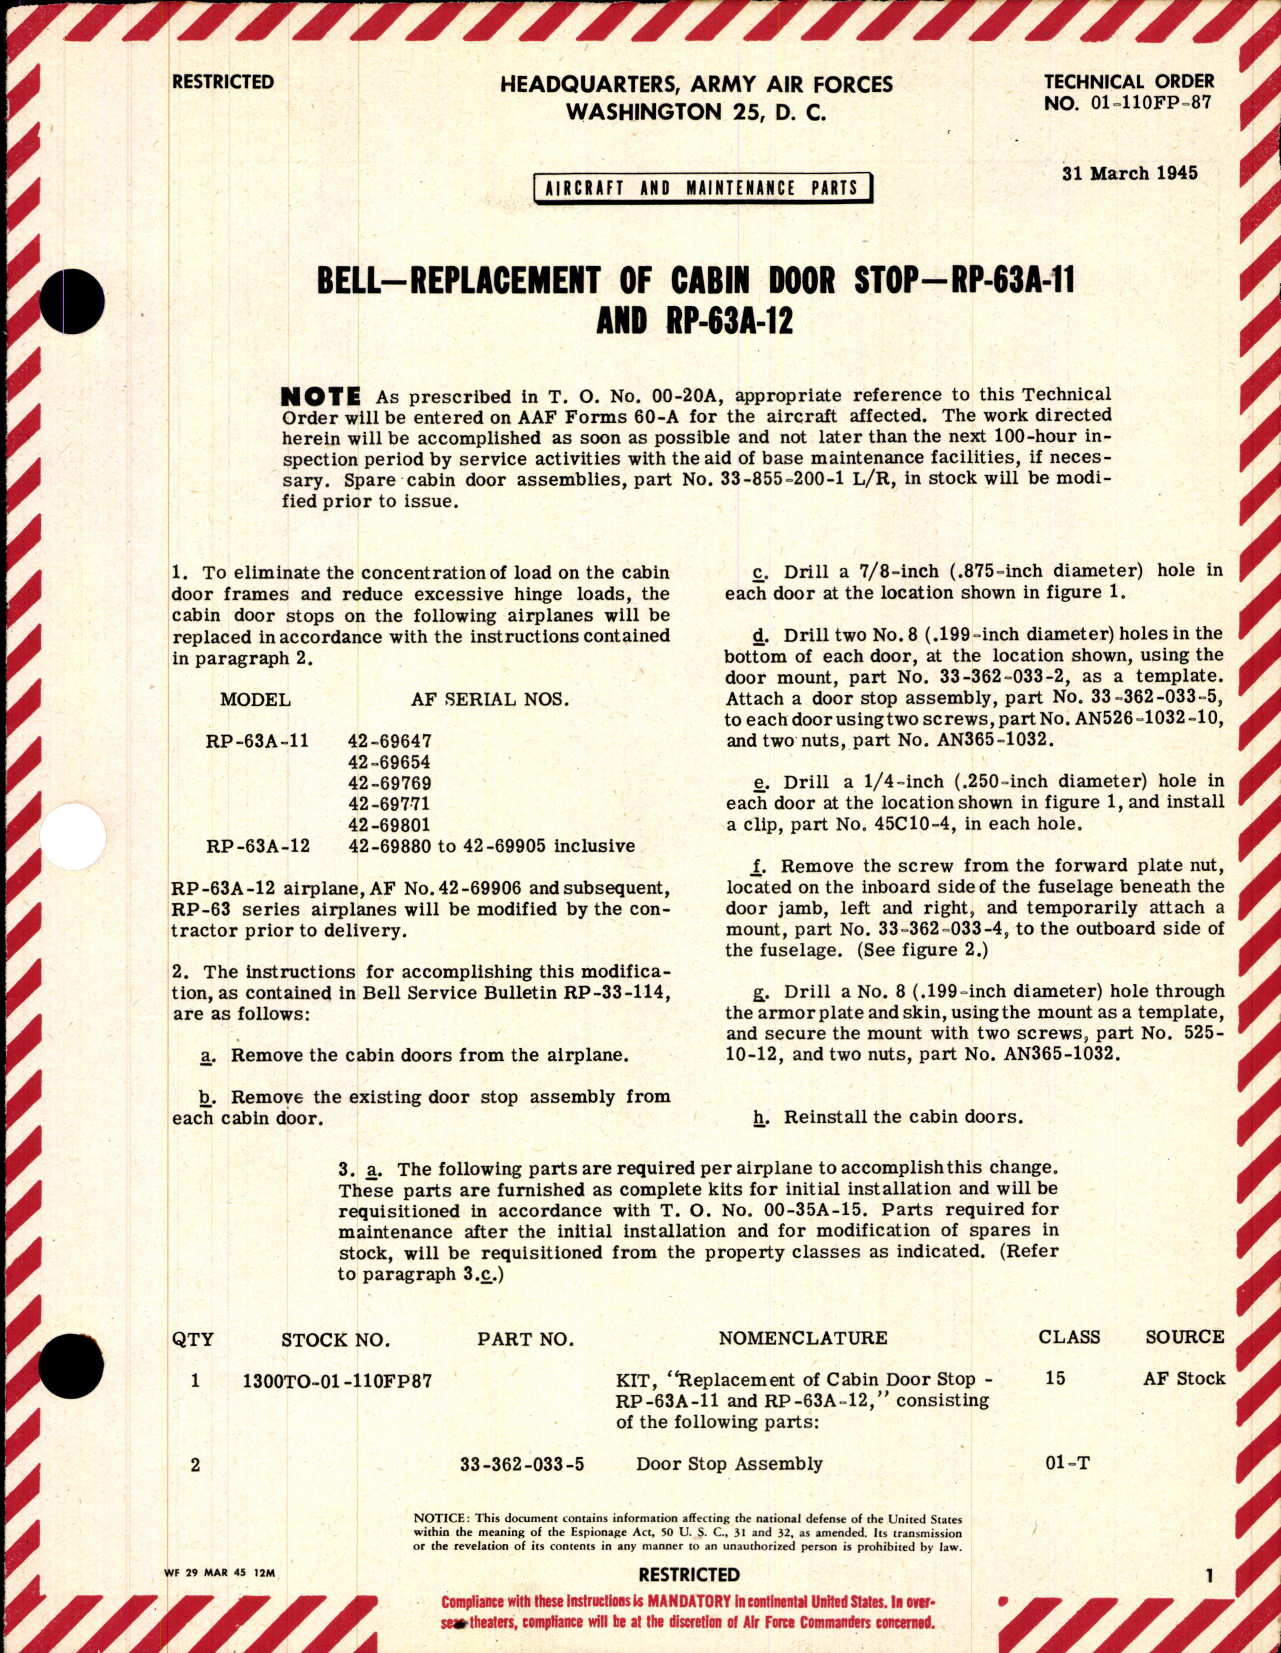 Sample page 1 from AirCorps Library document: Replacement of Cabing Door Stop for RP-63A